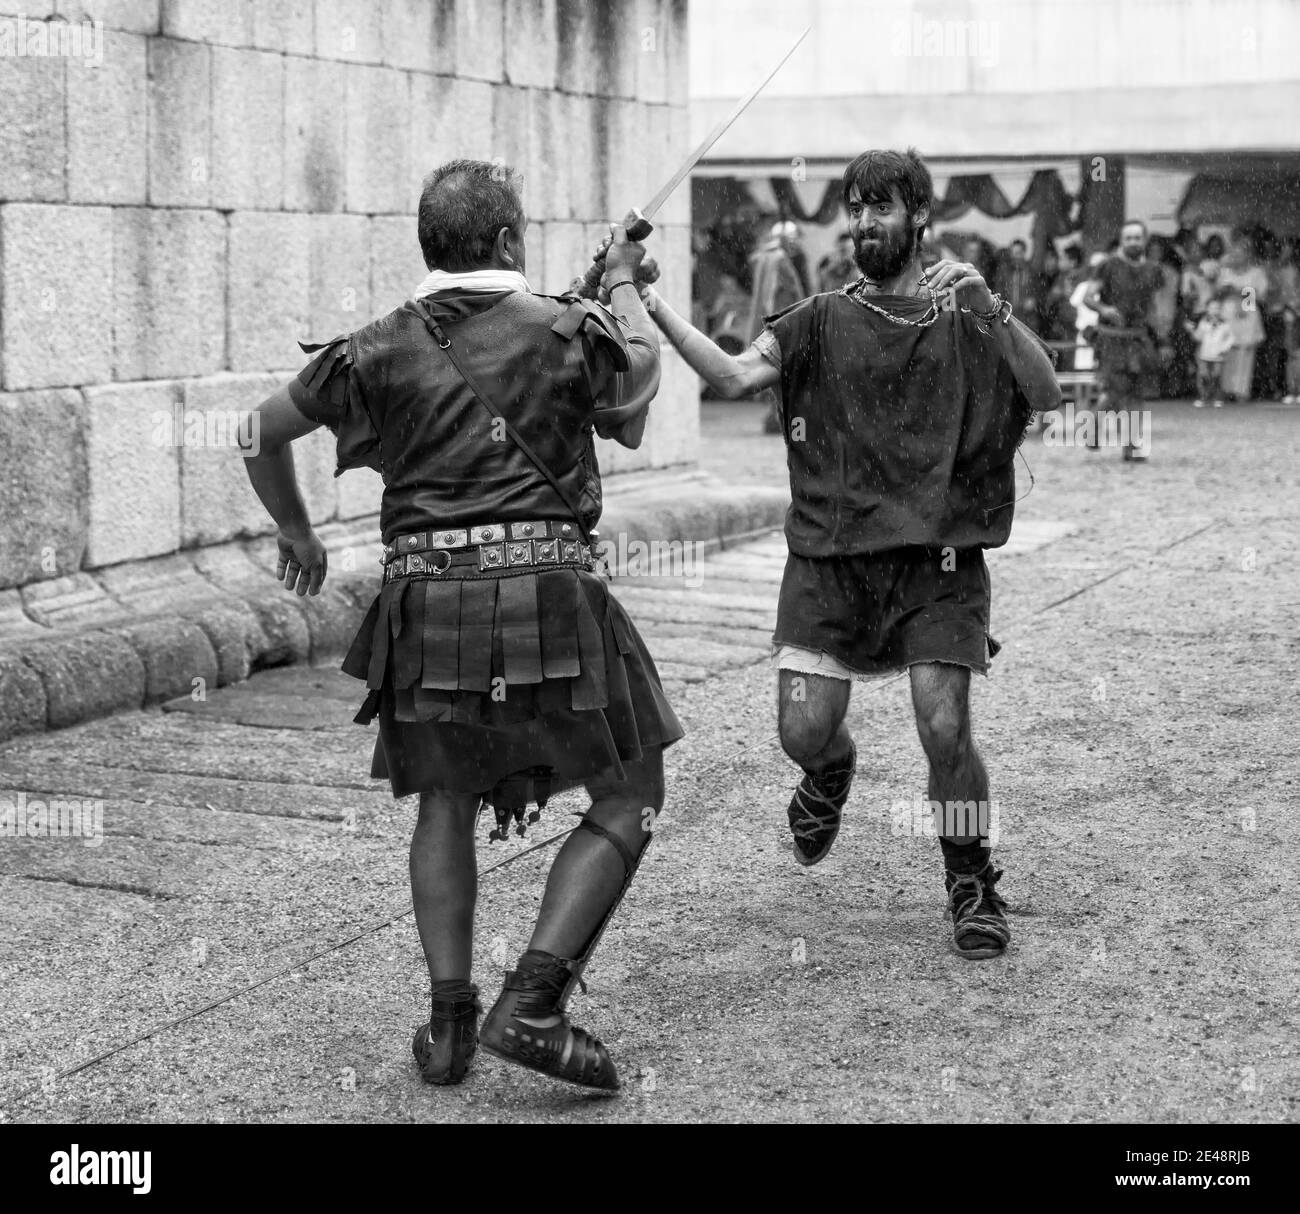 MERIDA, SPAIN - Sep 27, 2014: Two people dressed in costumes of Roman legionary and barbarian, participates in historical reenactment of wars against Stock Photo